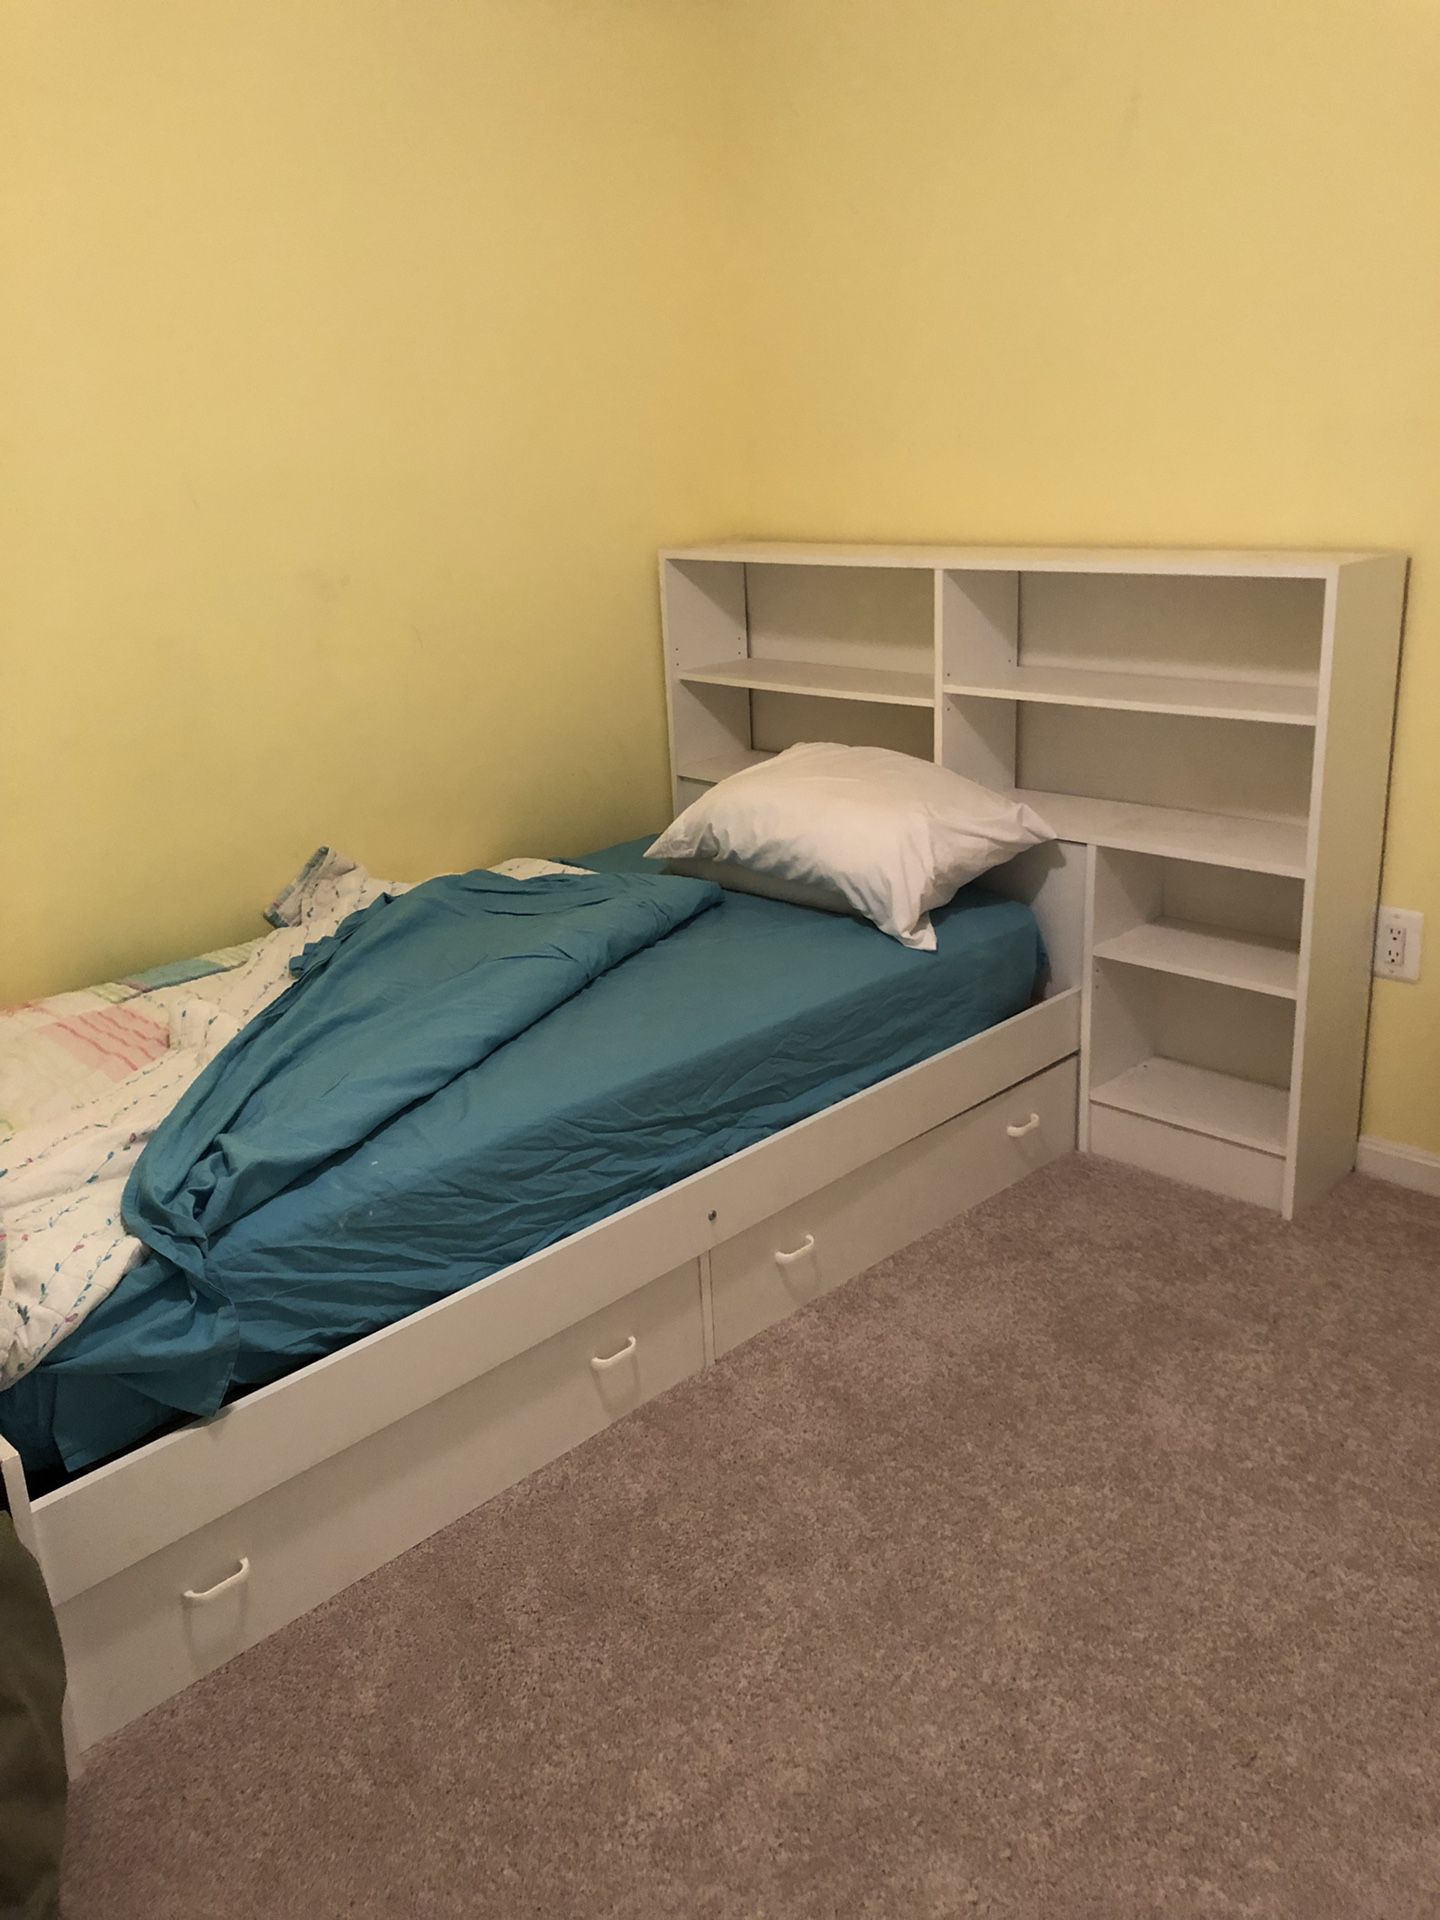 Twin beds. One with storage and attached bookcase ($60). One with just mattress, box spring and metal frame. Must pick up from 2nd floor of house.